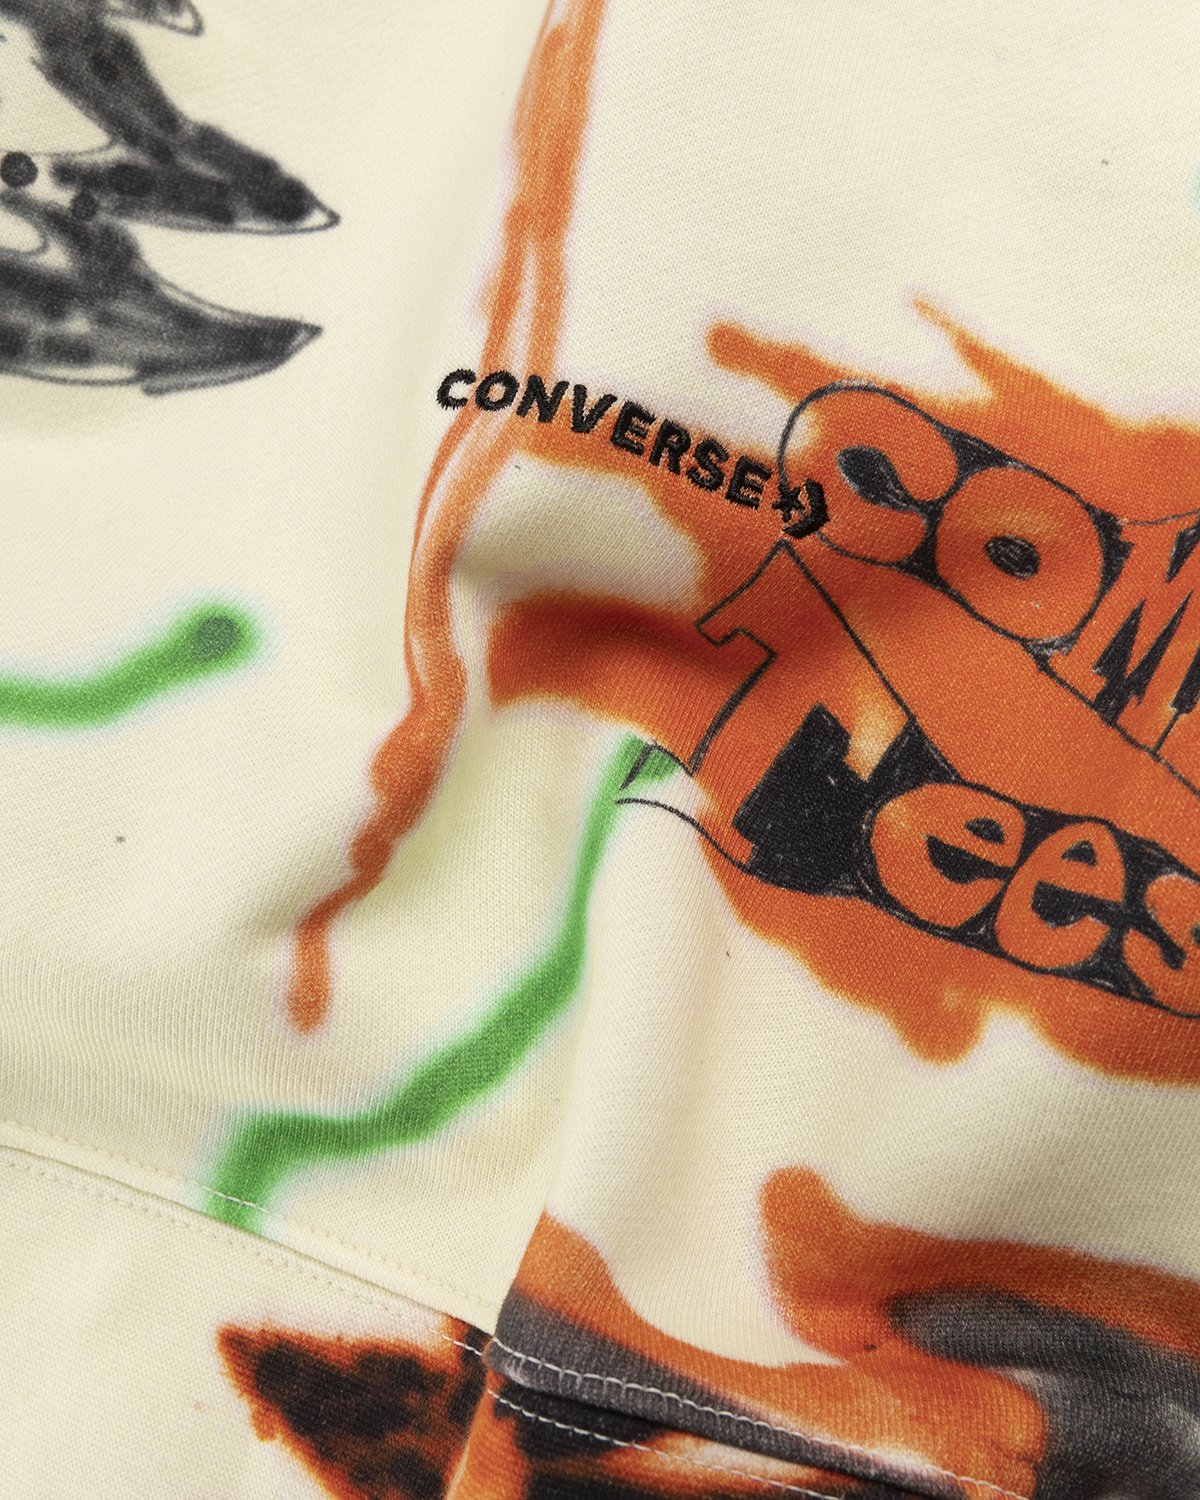 Converse x Come Tees - Floral Triangle Tee Bone - Clothing - Multi - Image 6